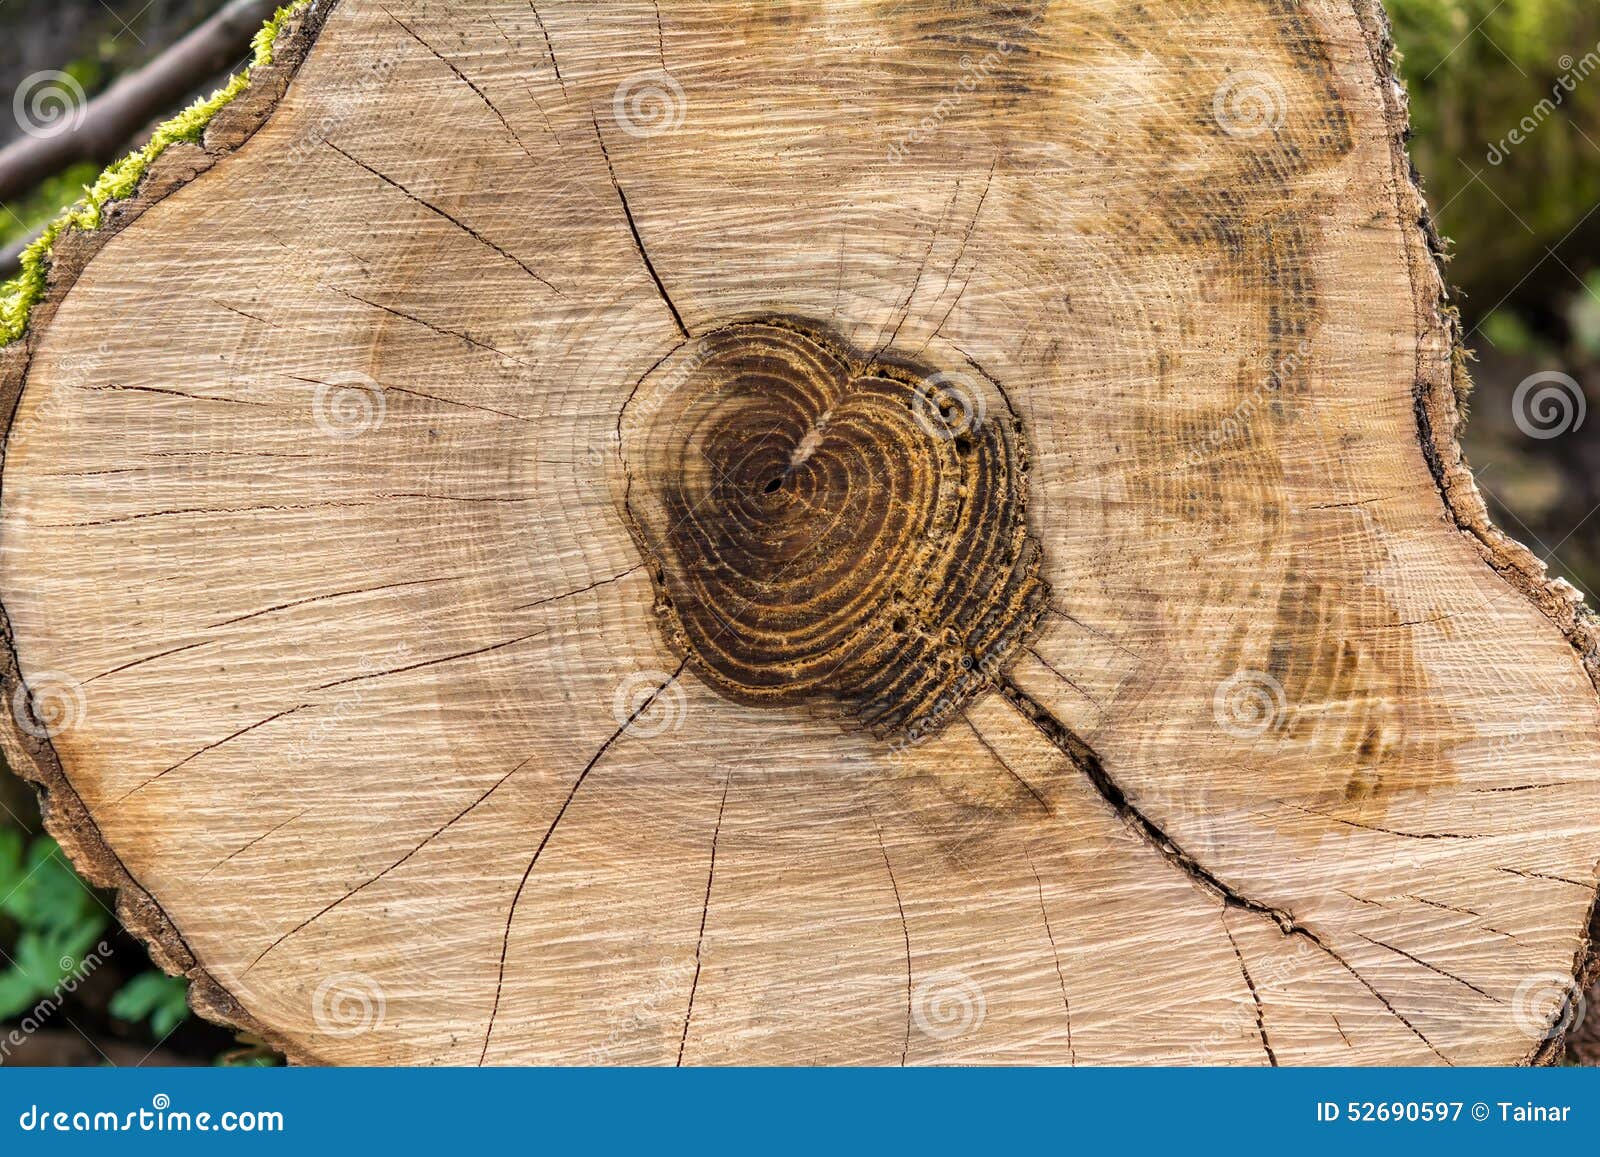 File:Coccoloba uvifera - view of tree trunk branch transverse cut showing  growth rings 01.jpg - Wikipedia